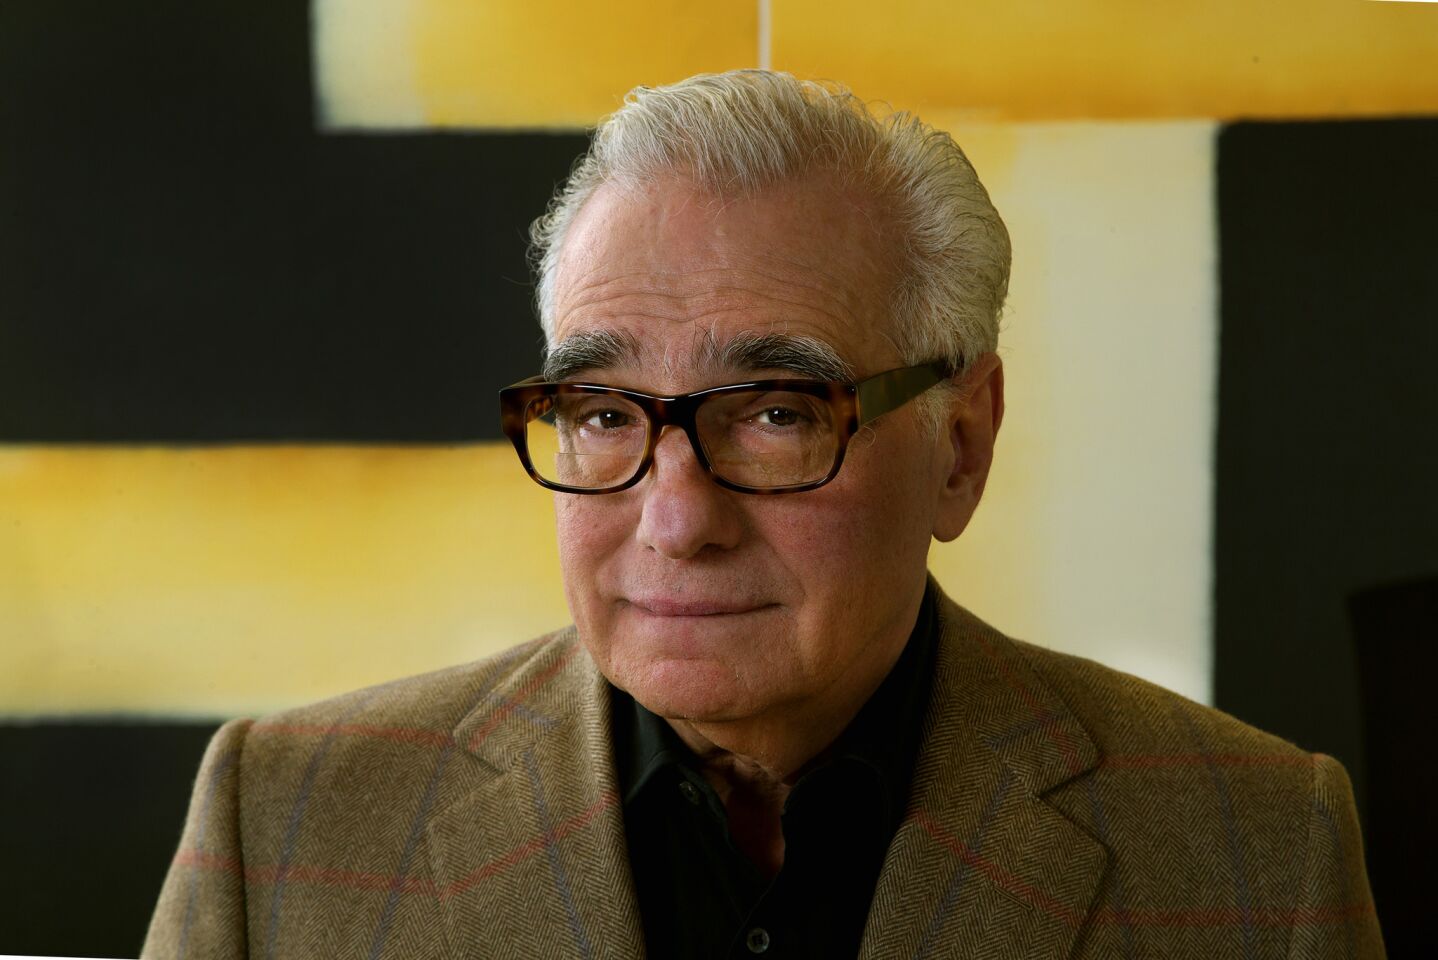 Celebrity portraits by The Times | Martin Scorsese